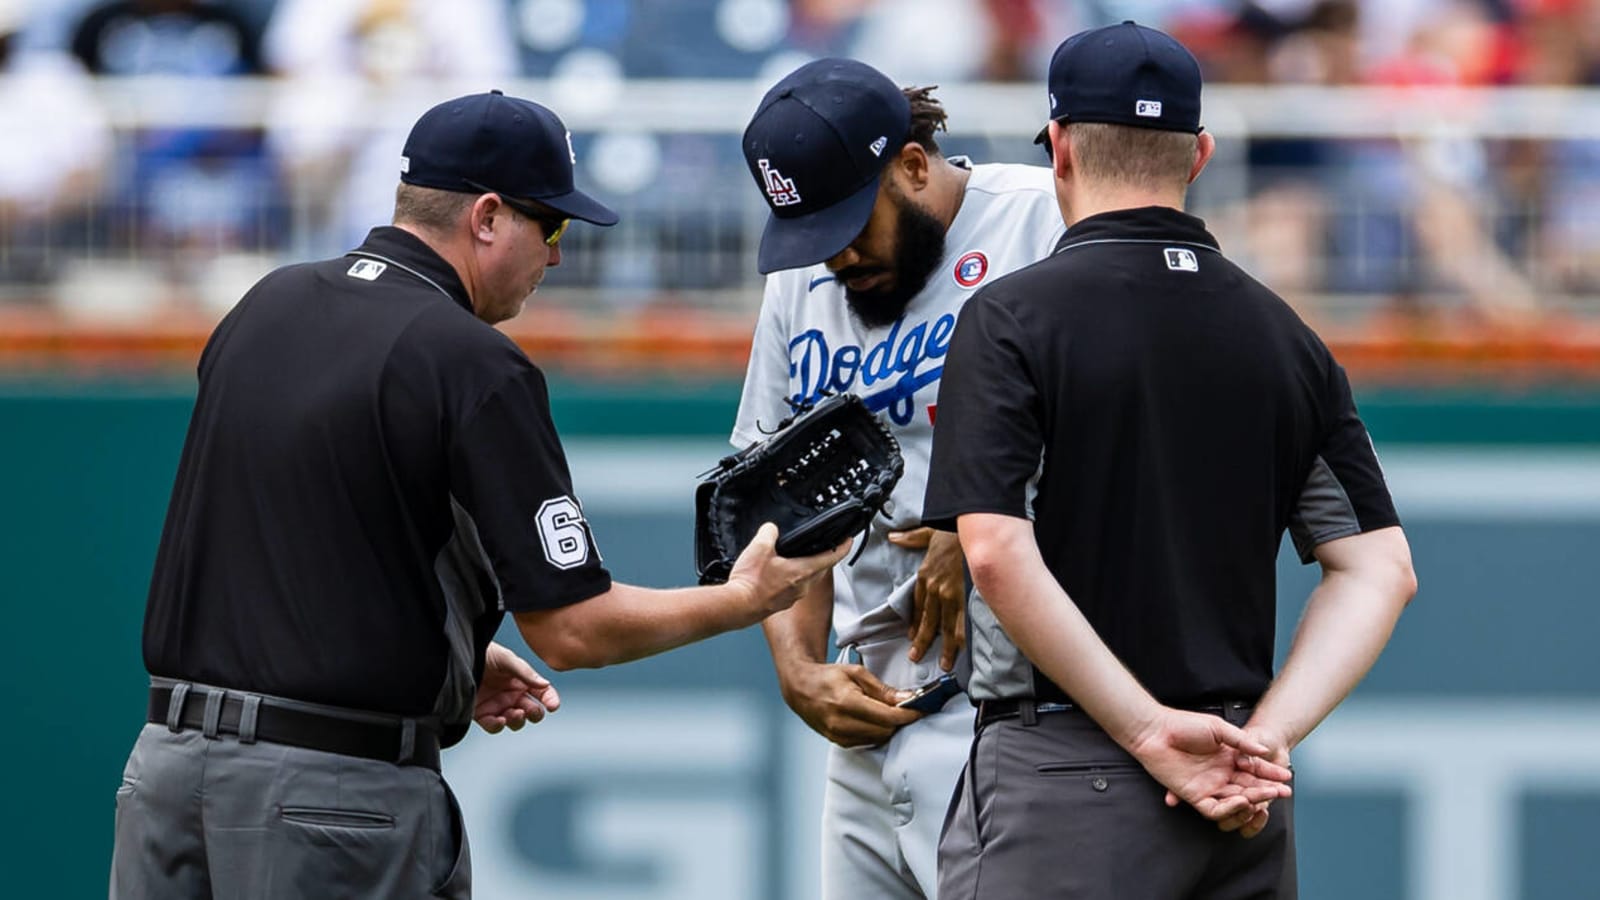 MLB: Further crackdowns on 'sticky stuff' coming this season